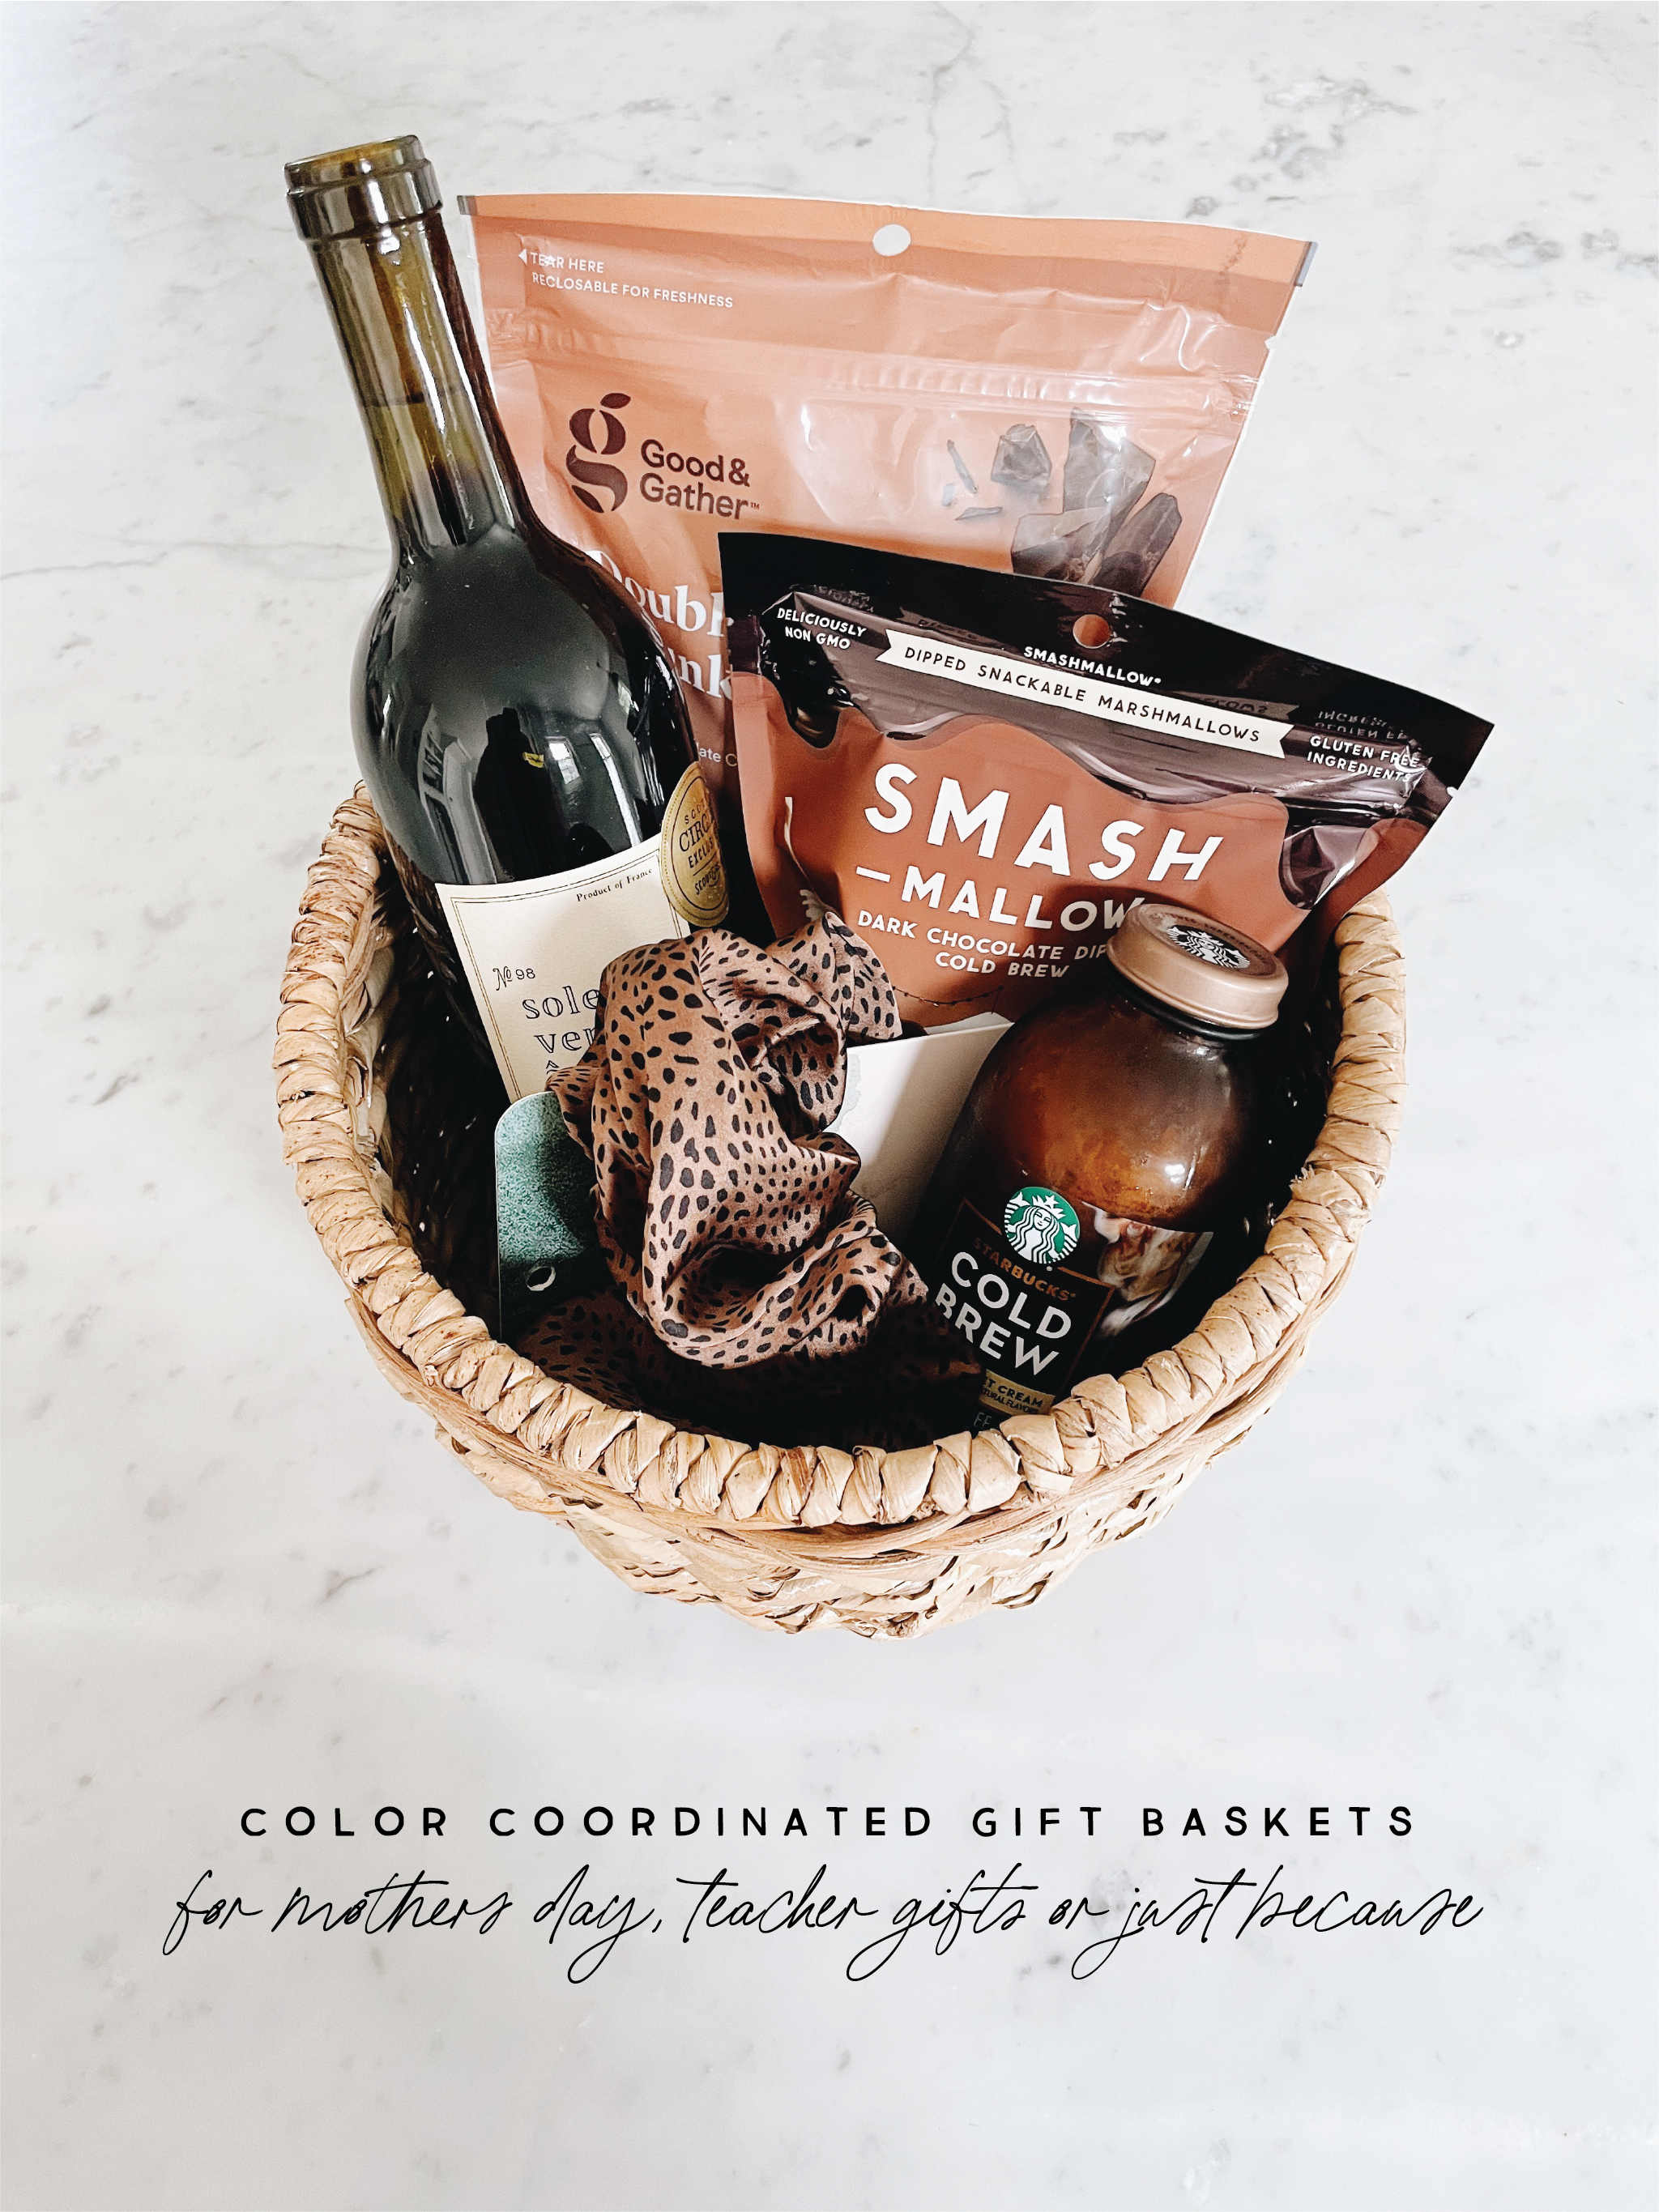 Kitchen Gift Basket for Mother's Day - 10 Tips for the Perfect Basket